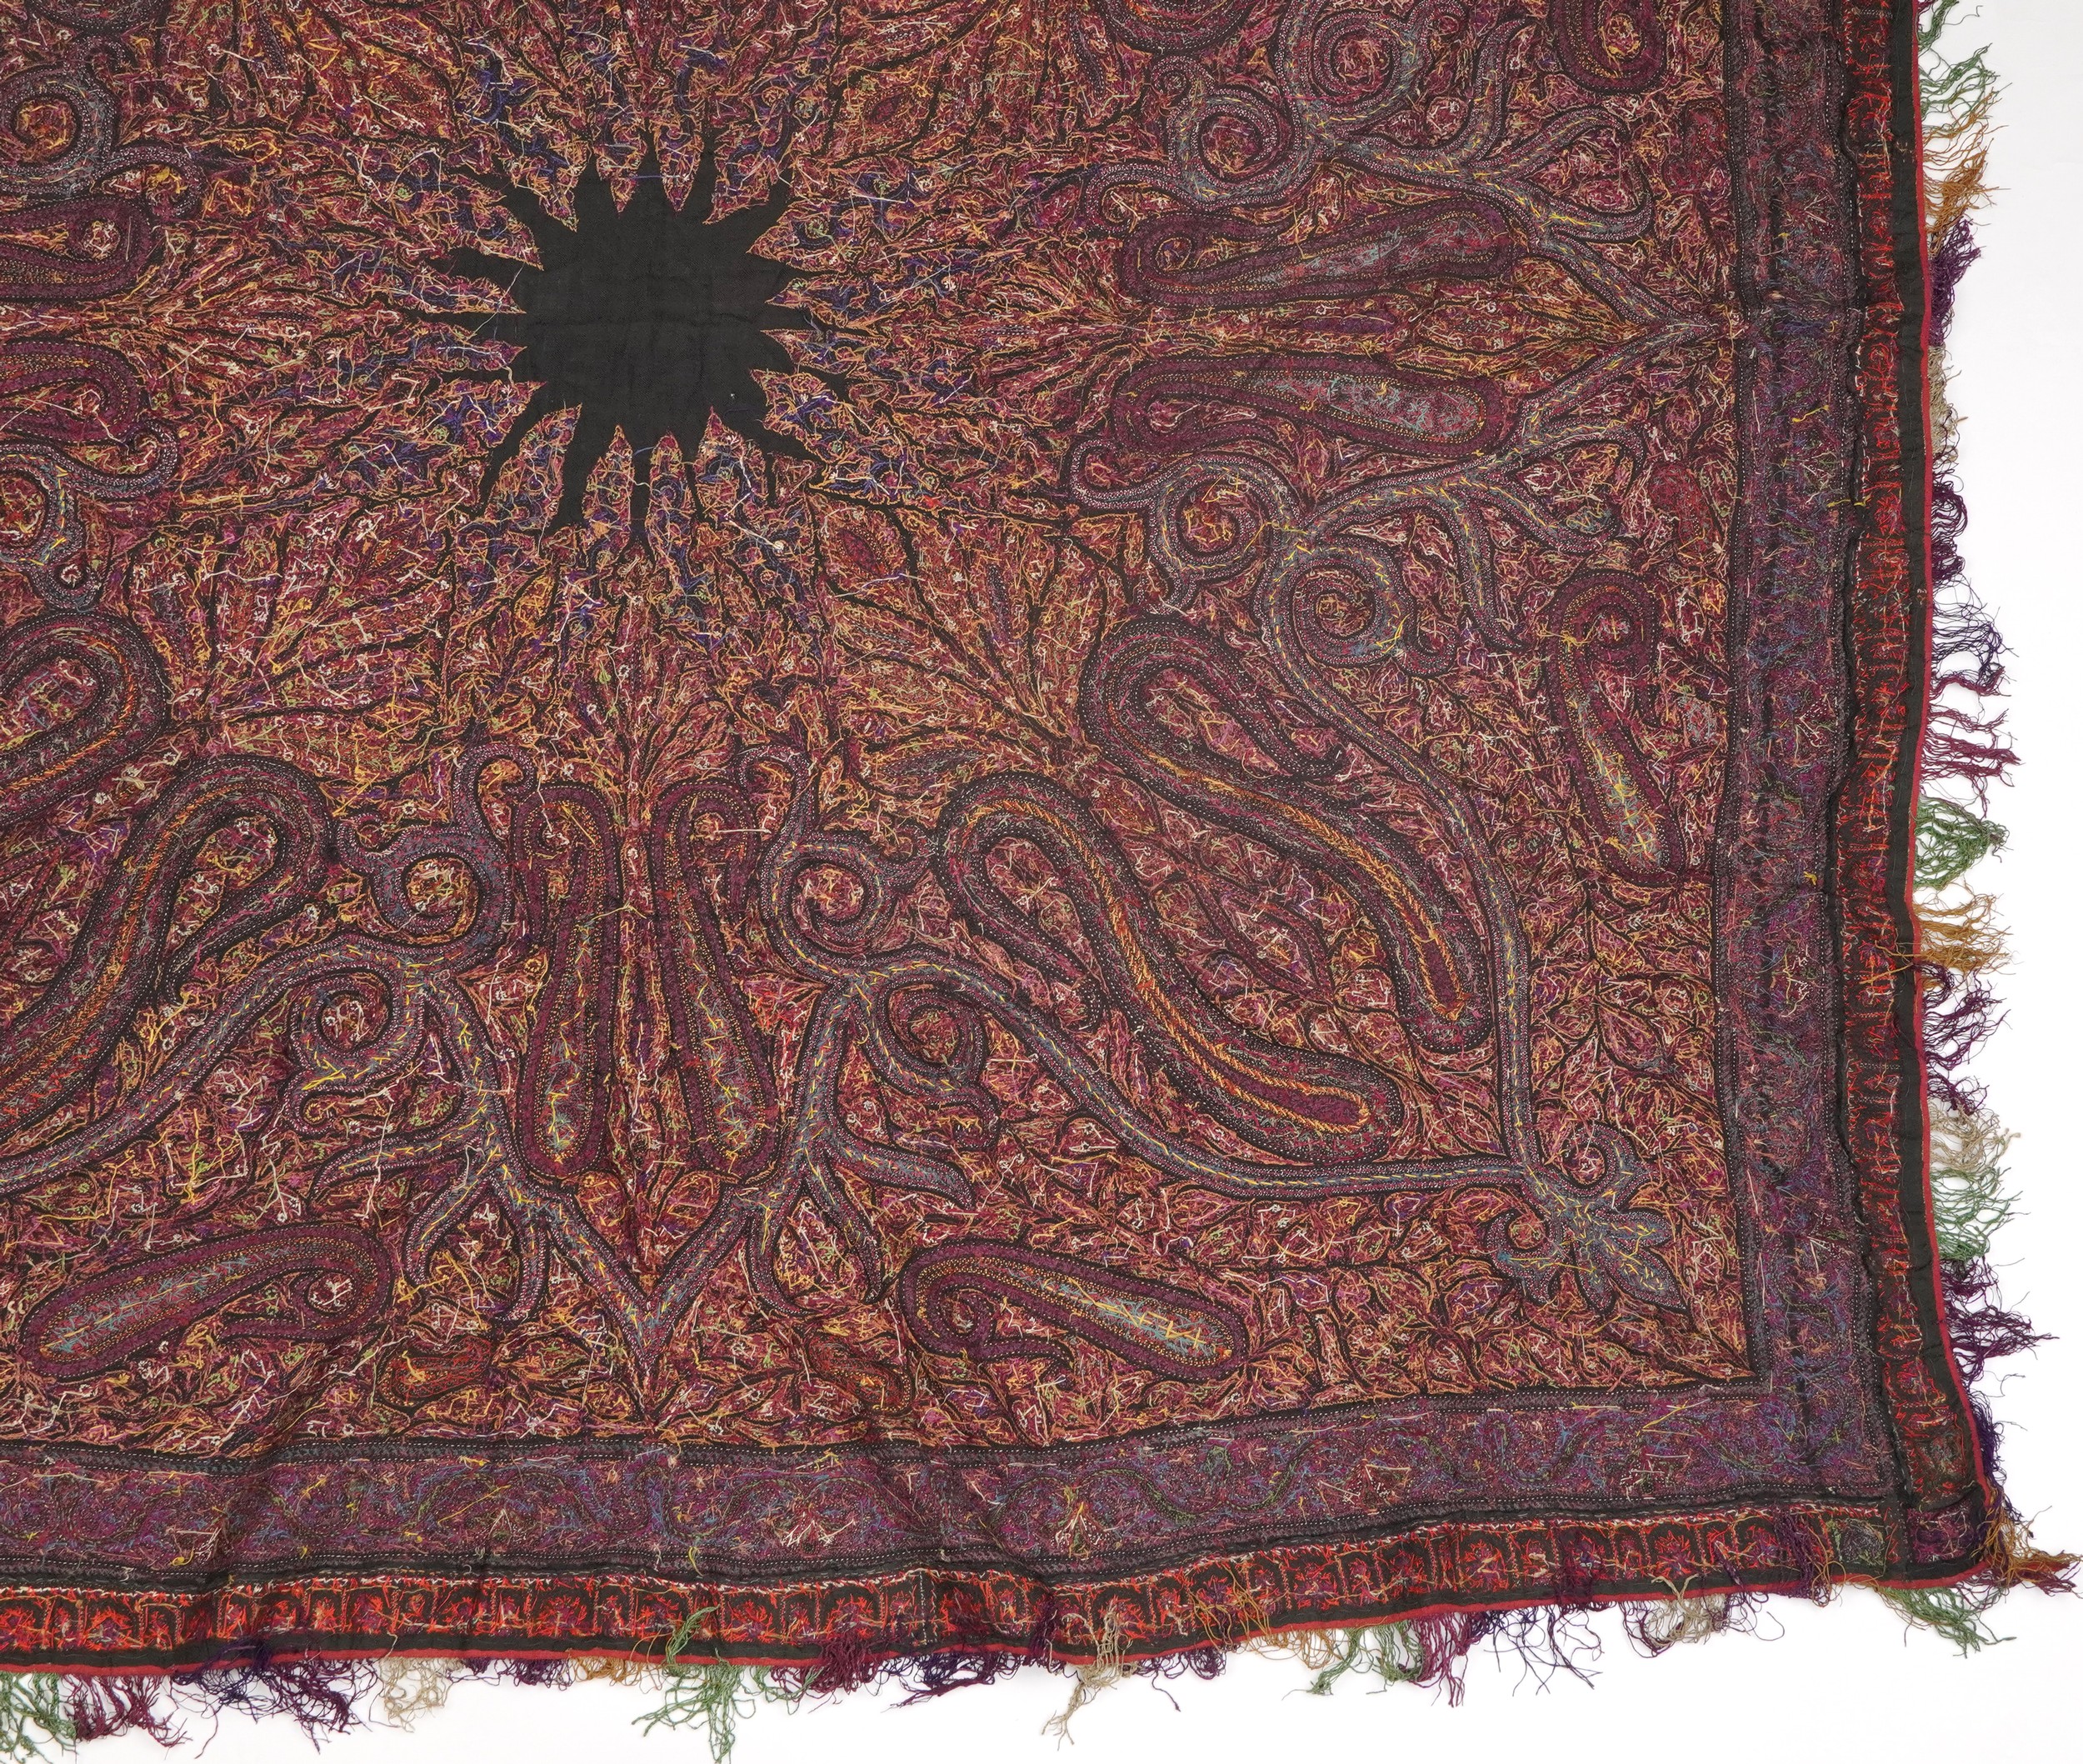 19th century Indian Kashmir/cashmere textile or shawl, 170cm x 170cm : For further information on - Image 12 of 12